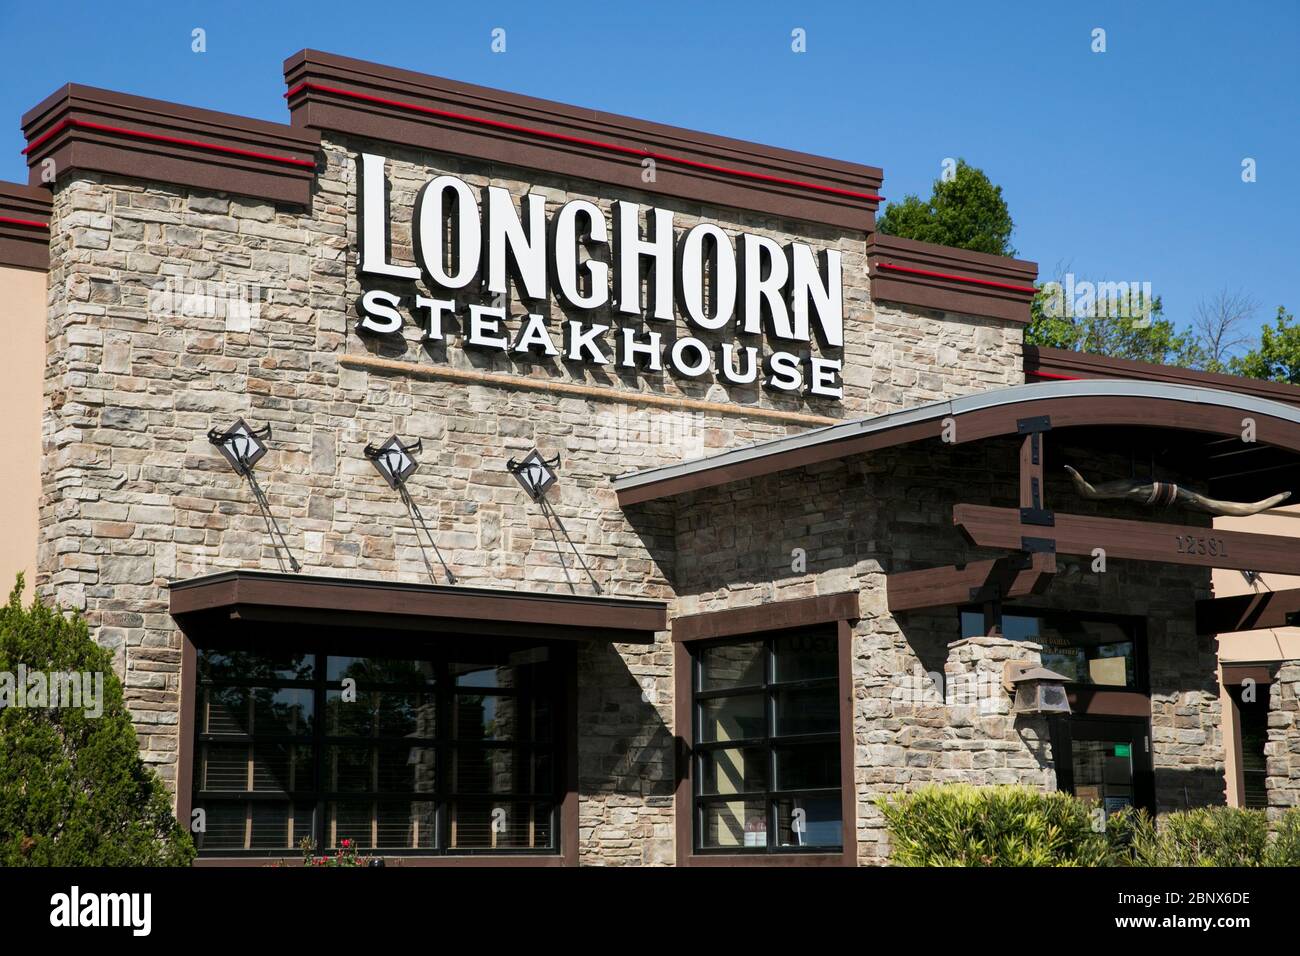 A logo sign outside of a LongHorn Steakhouse restaurant location in Newport News, Virginia on May 2, 2020. Stock Photo